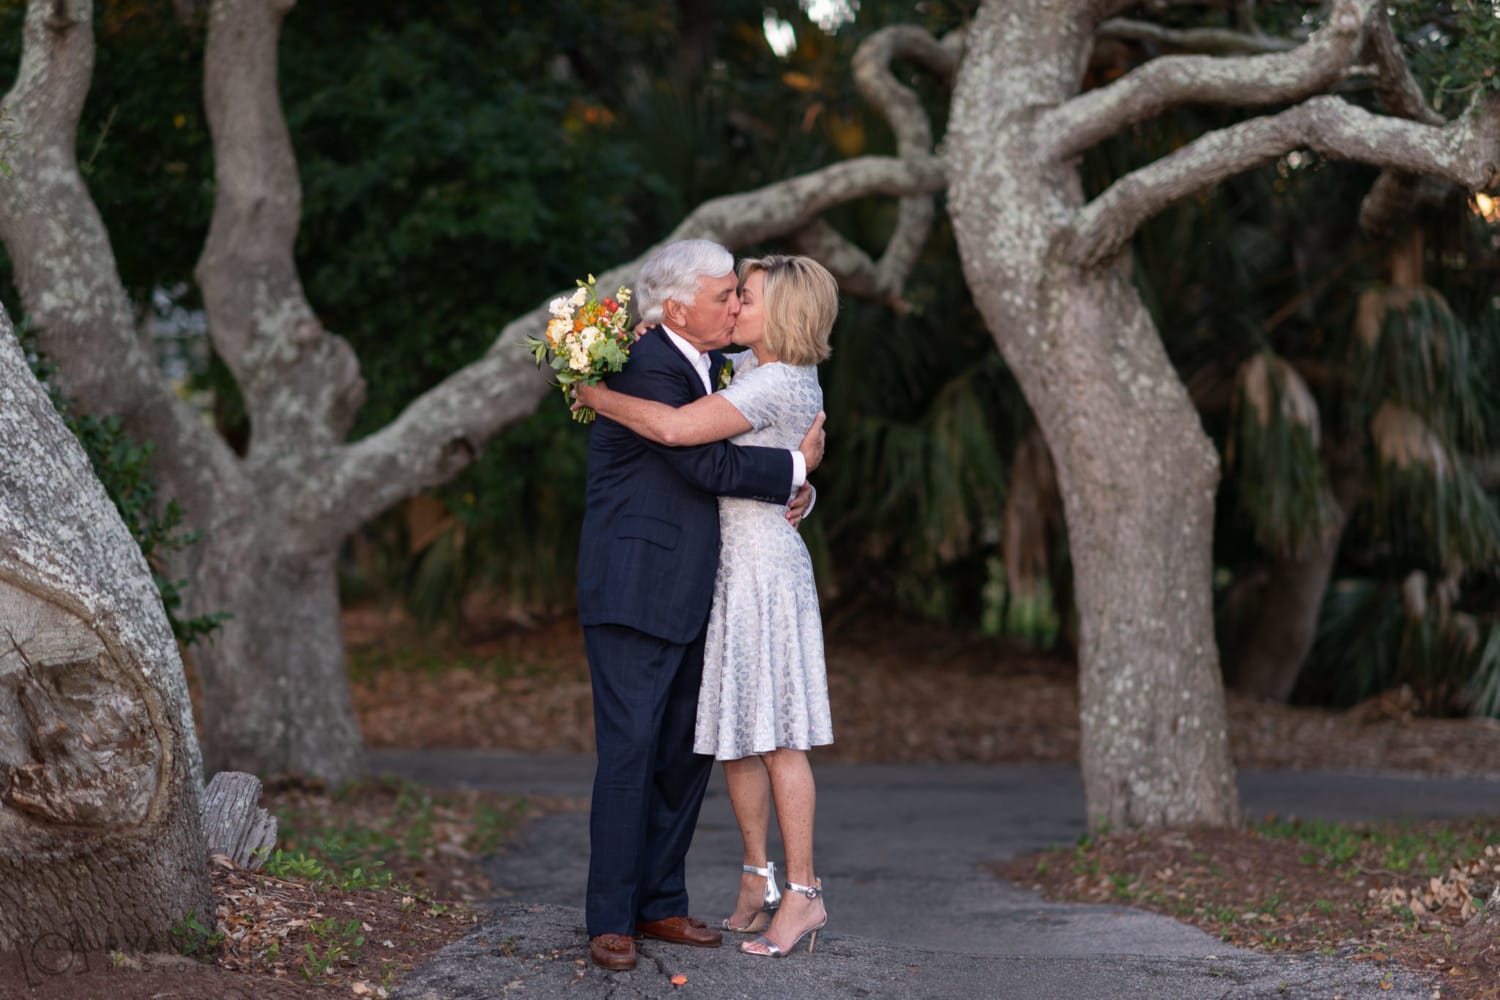 Kiss by the old oaks - Dunes Golf and Beach Club - Myrtle Beach